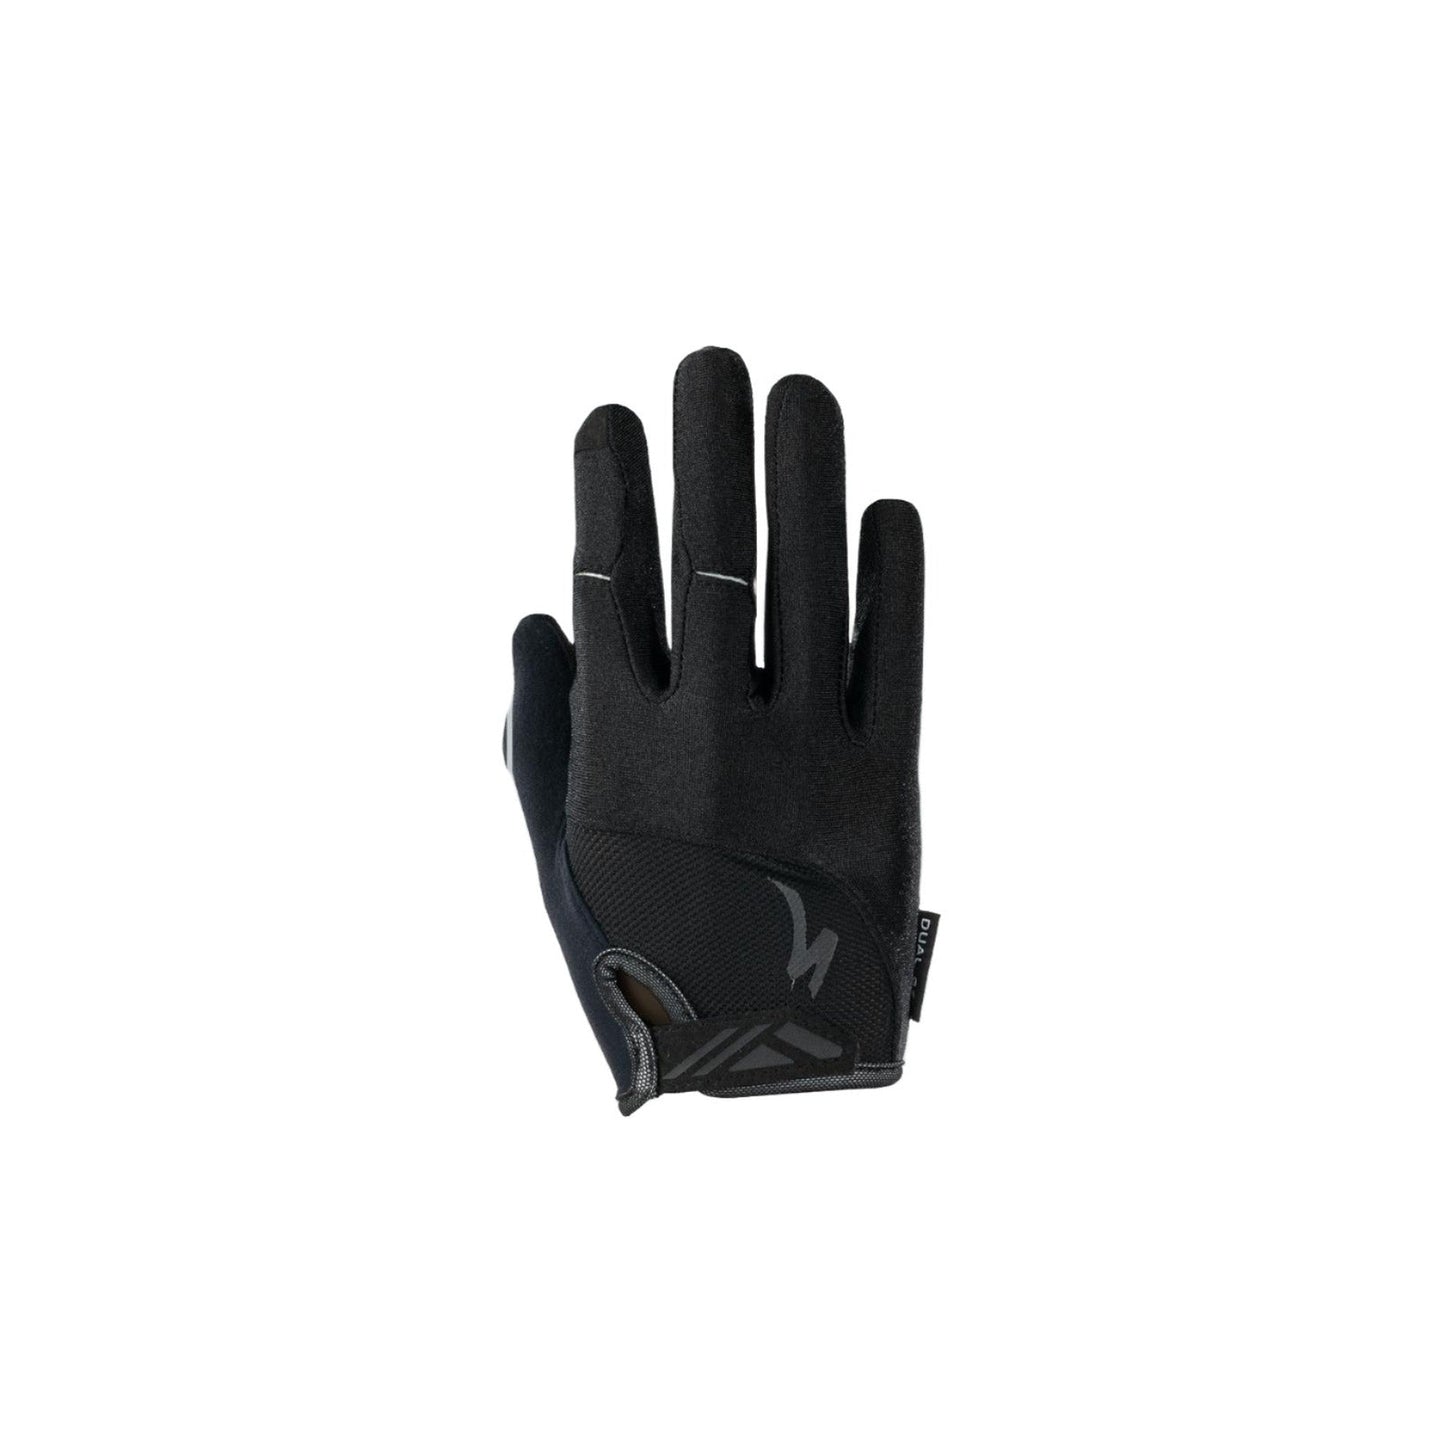 Women's Body Geometry Dual-Gel Long Finger Gloves | Complete Cyclist - Our WomenÕs Body Geometry Dual-Gel Longer Finger gloves are all about comfort, and are specifically tailored for female riders. They feature strategically